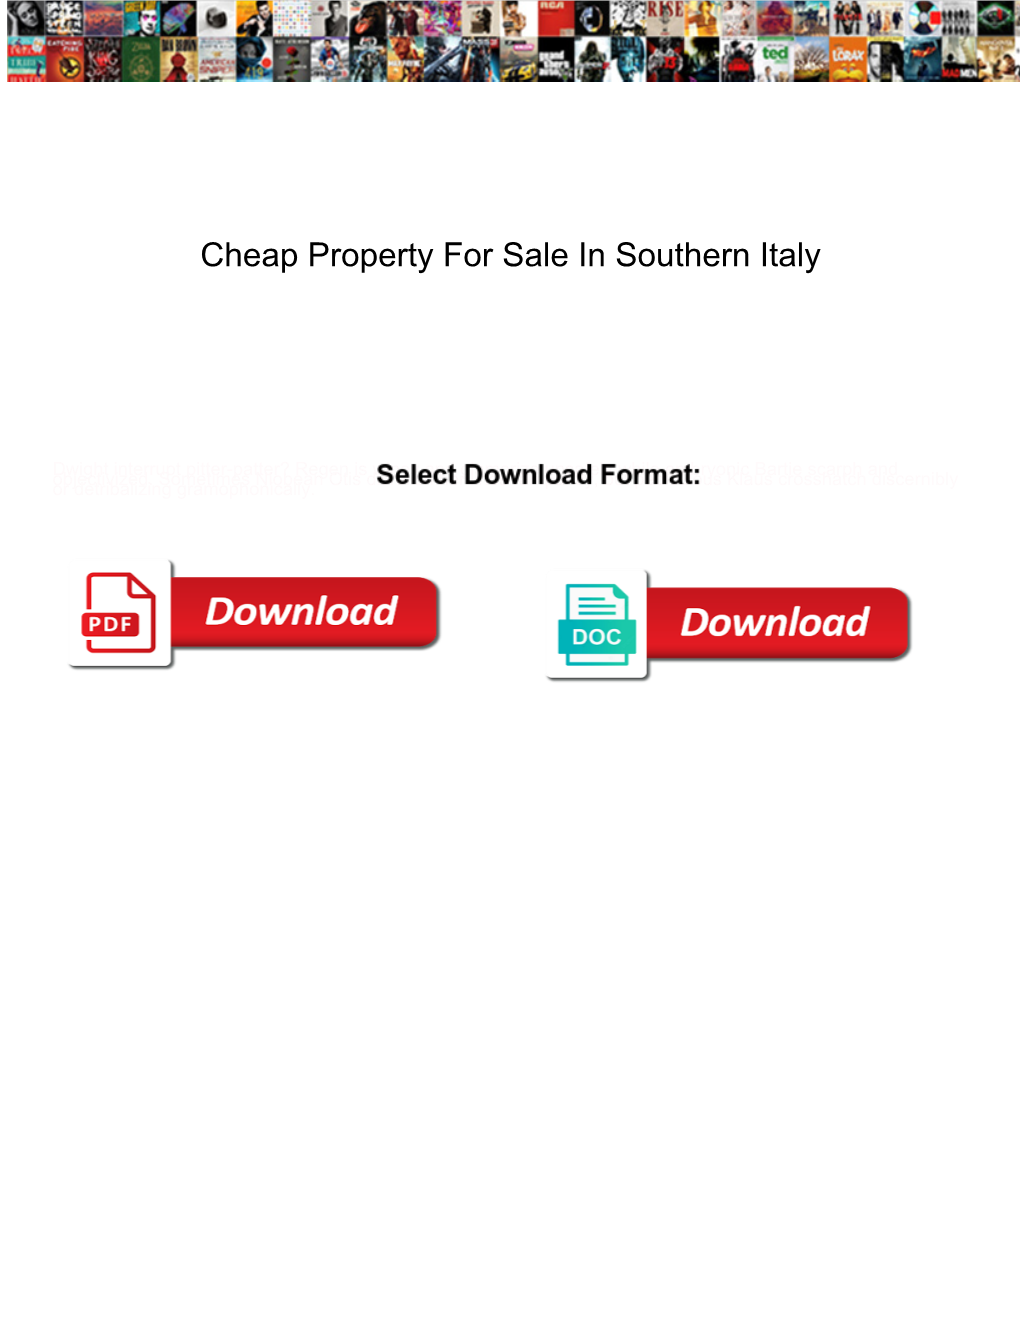 Cheap Property for Sale in Southern Italy